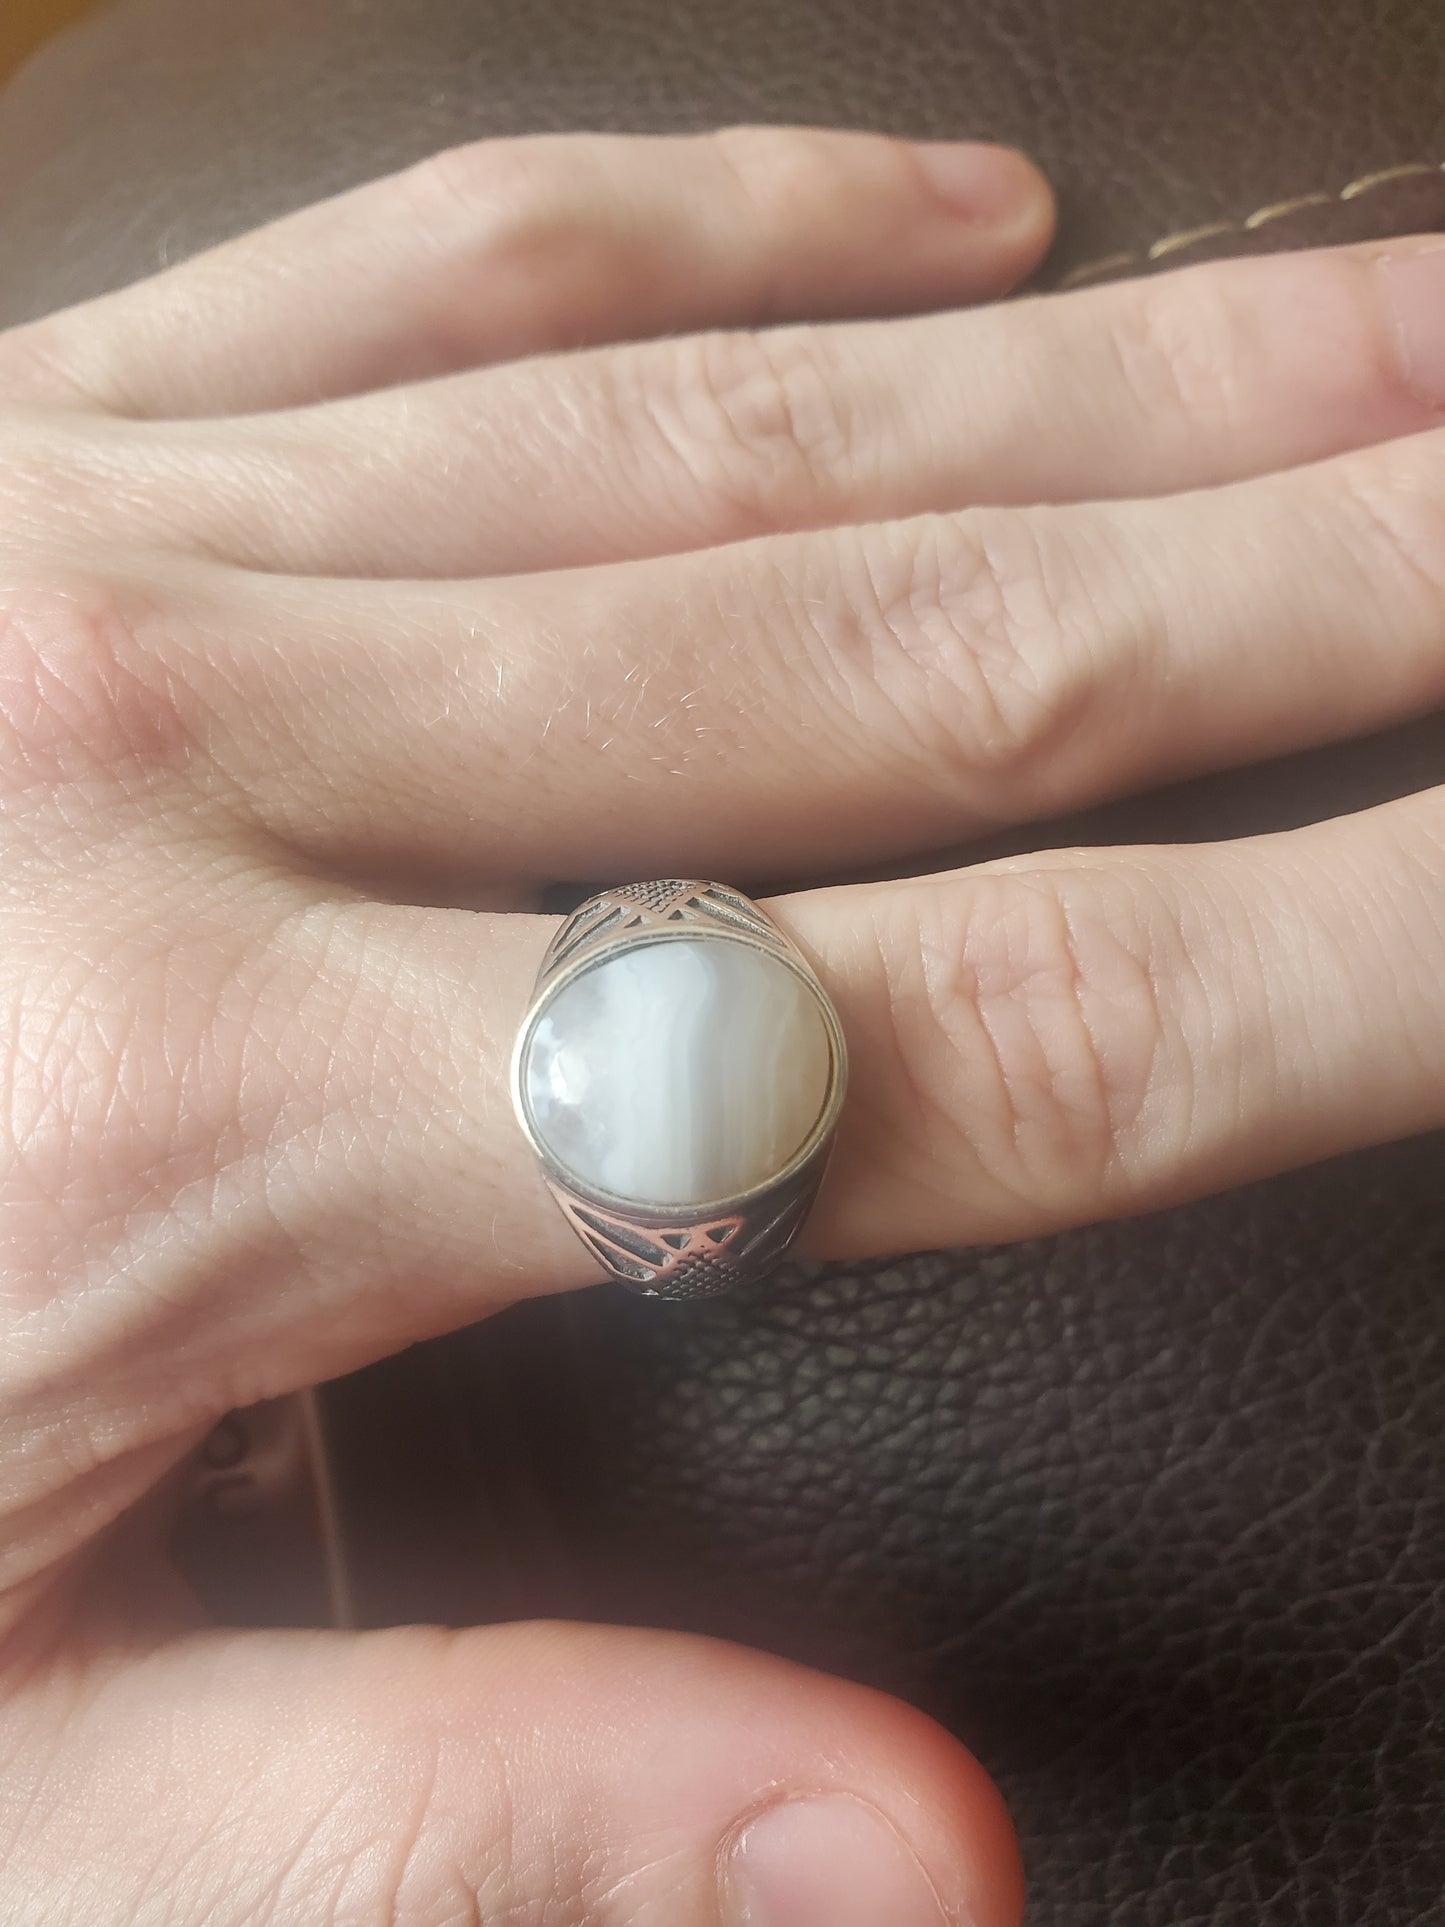 Banded Agate and Quartz Adjustable Ring - Silver, 12mm Oval Cab